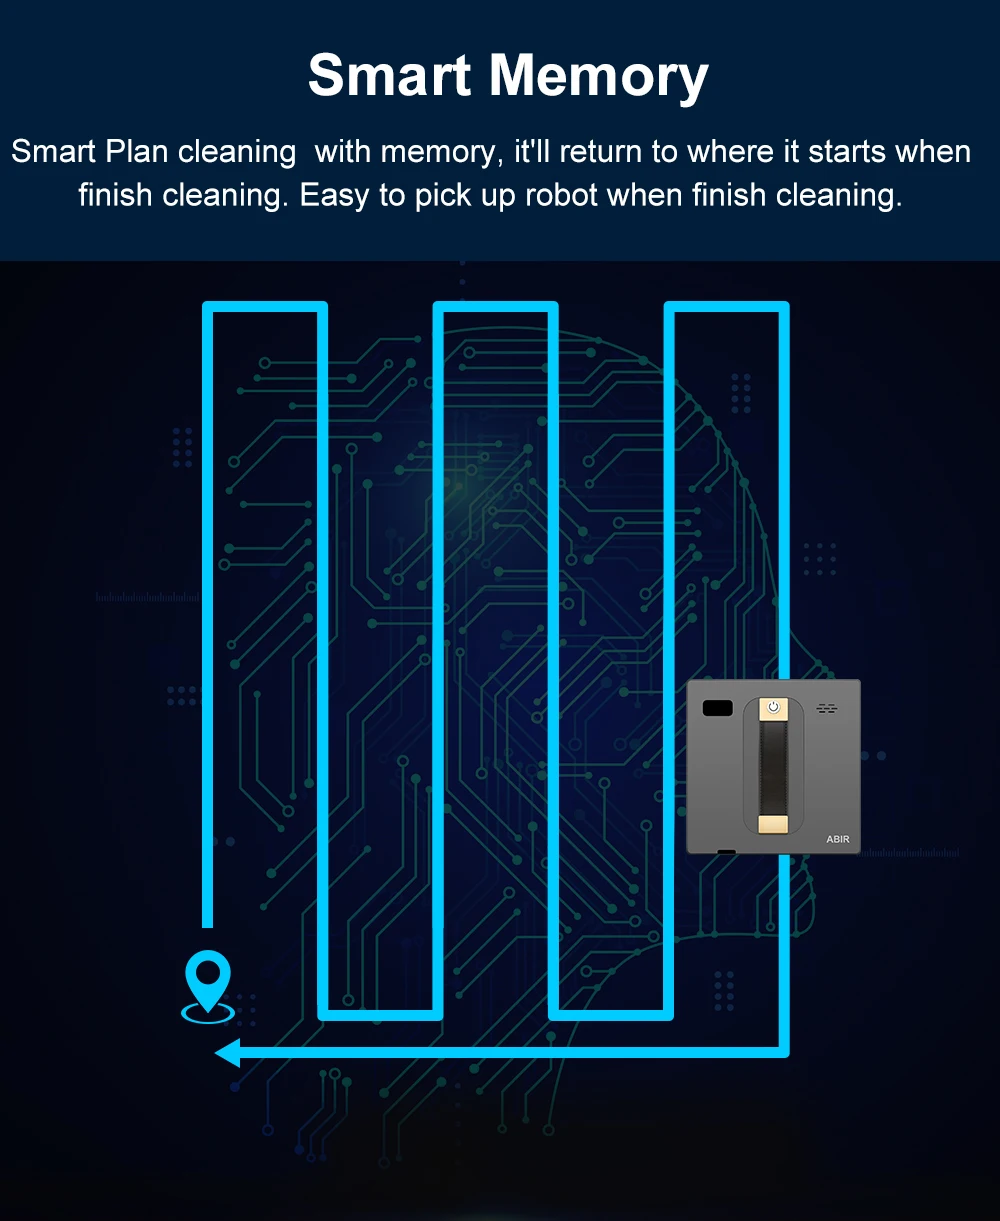 Smart Memory: Smart Plan cleaning with memory, till return to where it starts when finish cleaning. Easy to pick up robot when finish cleaning. 